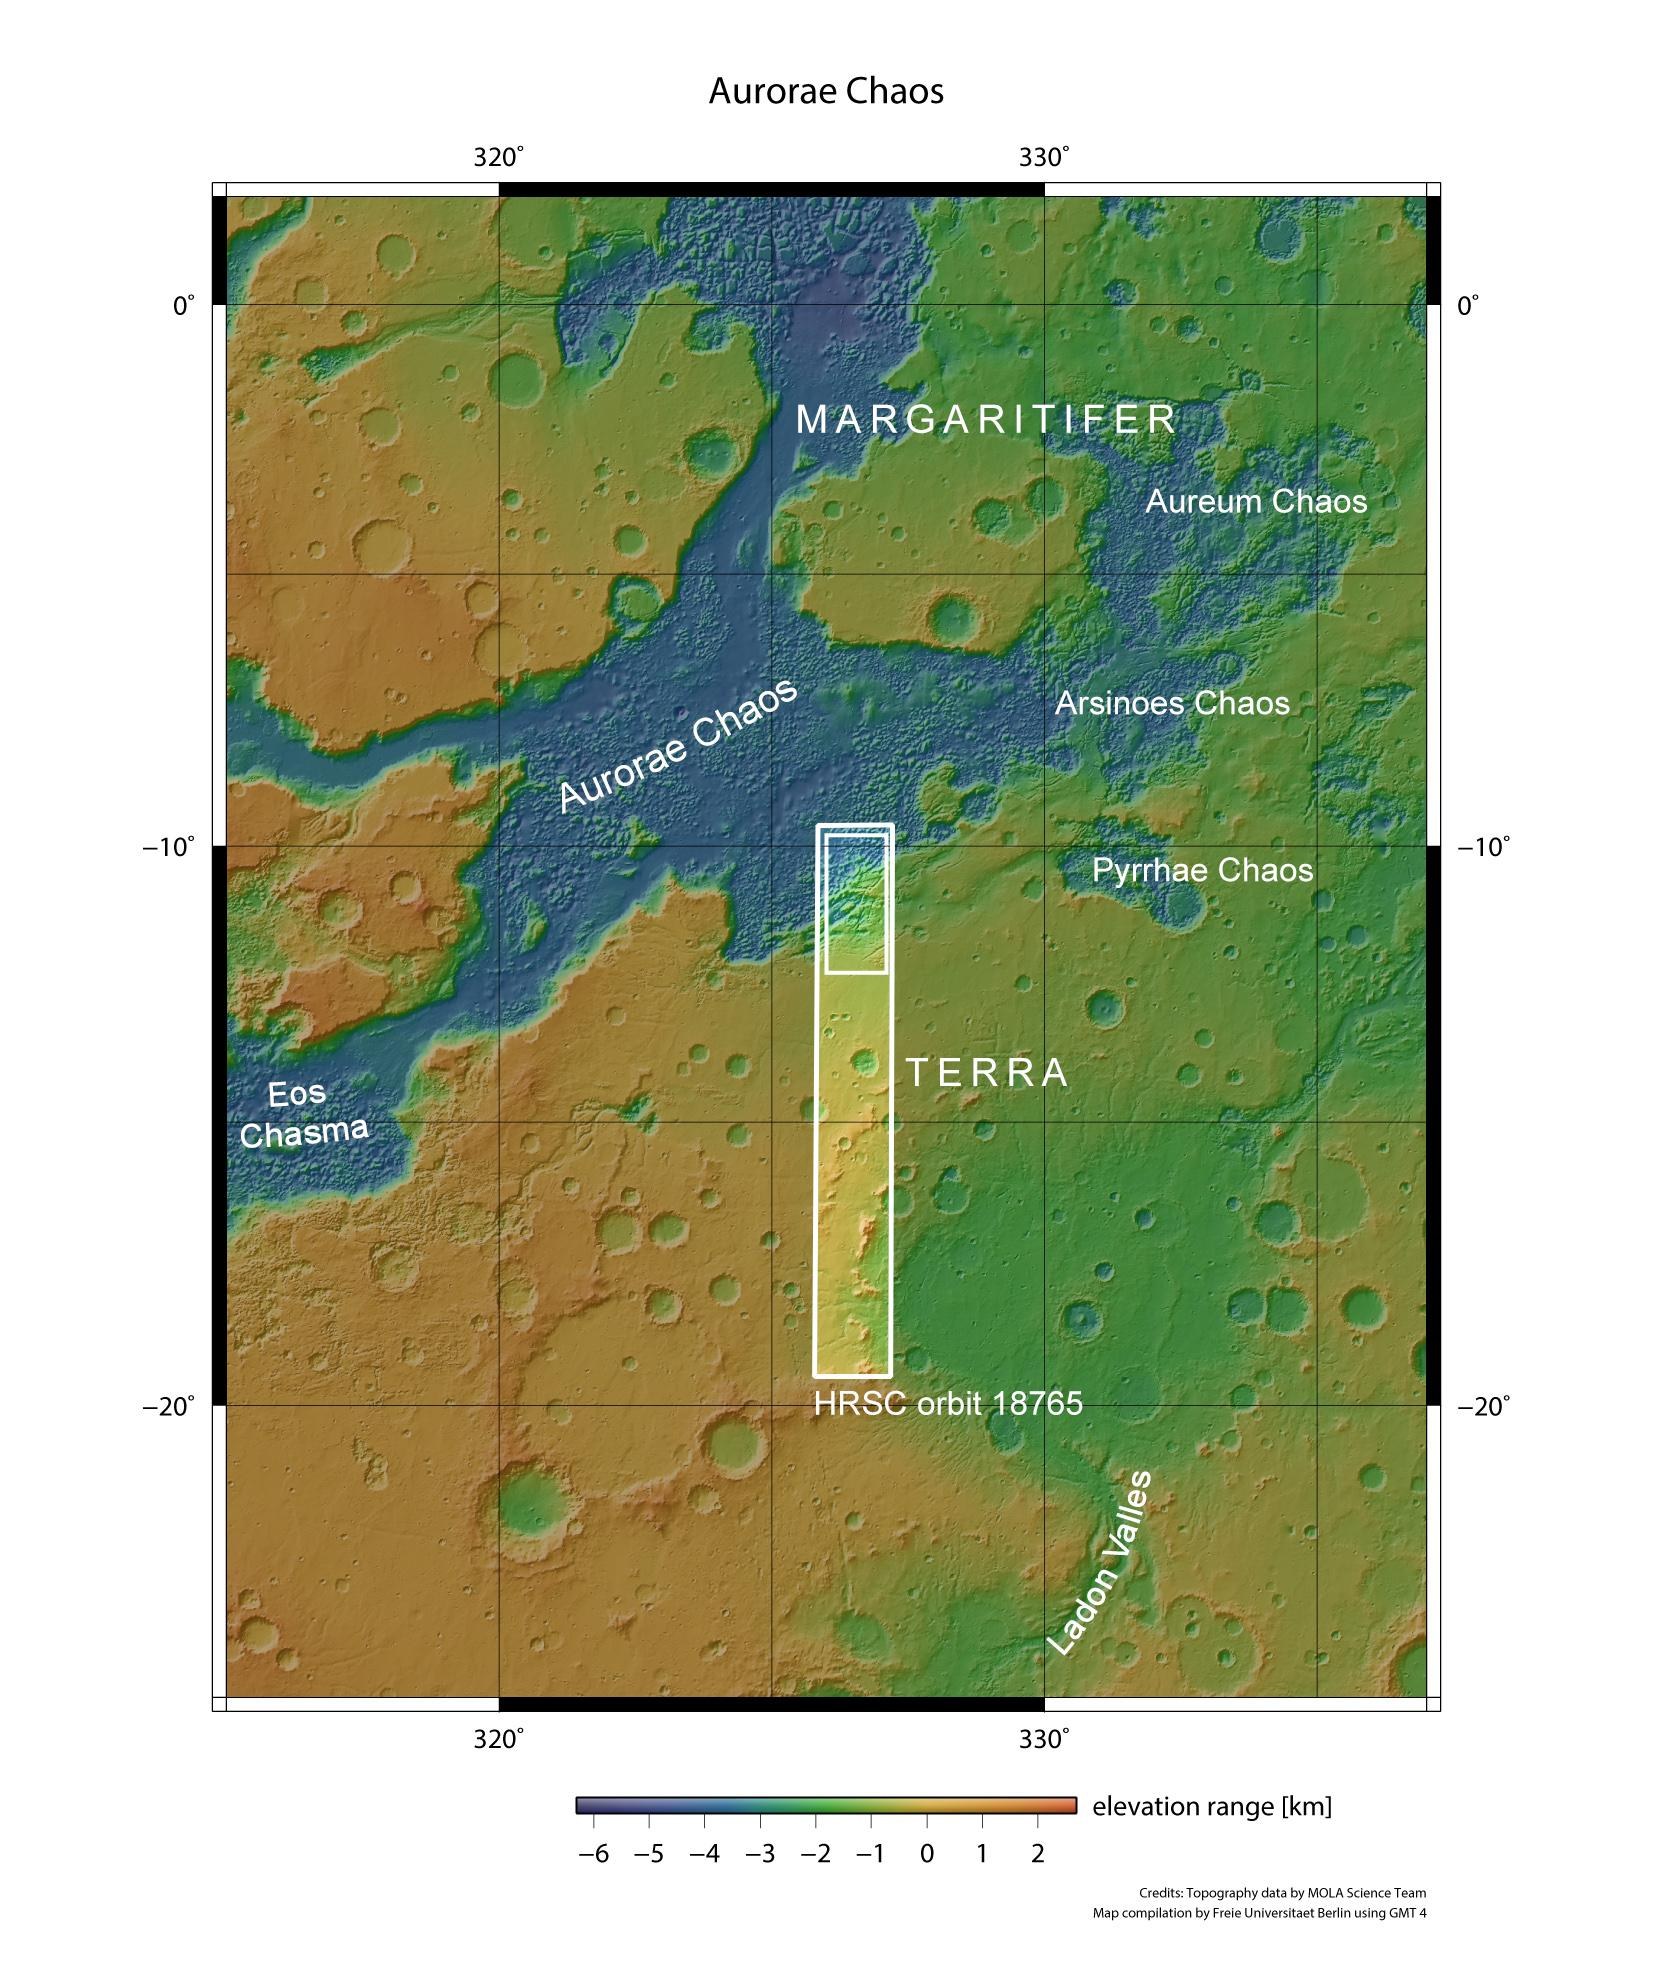 Topographical map of Margaritifer Terra and Aurorae Chaos